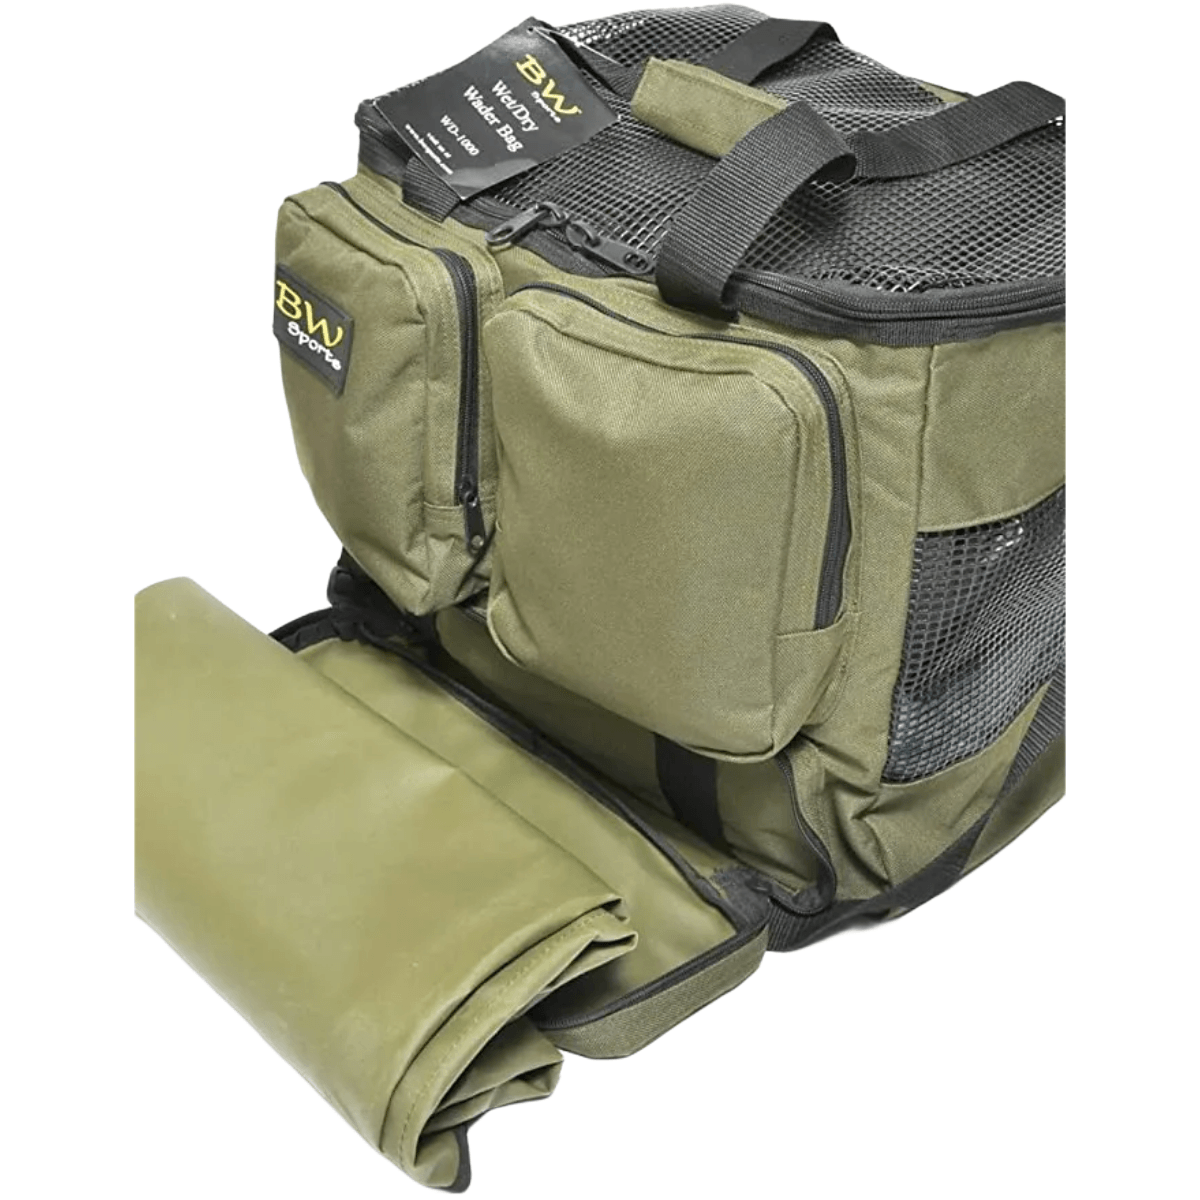 B W Sports Waders And Wading Boots Storage Carry Bag - Als.com